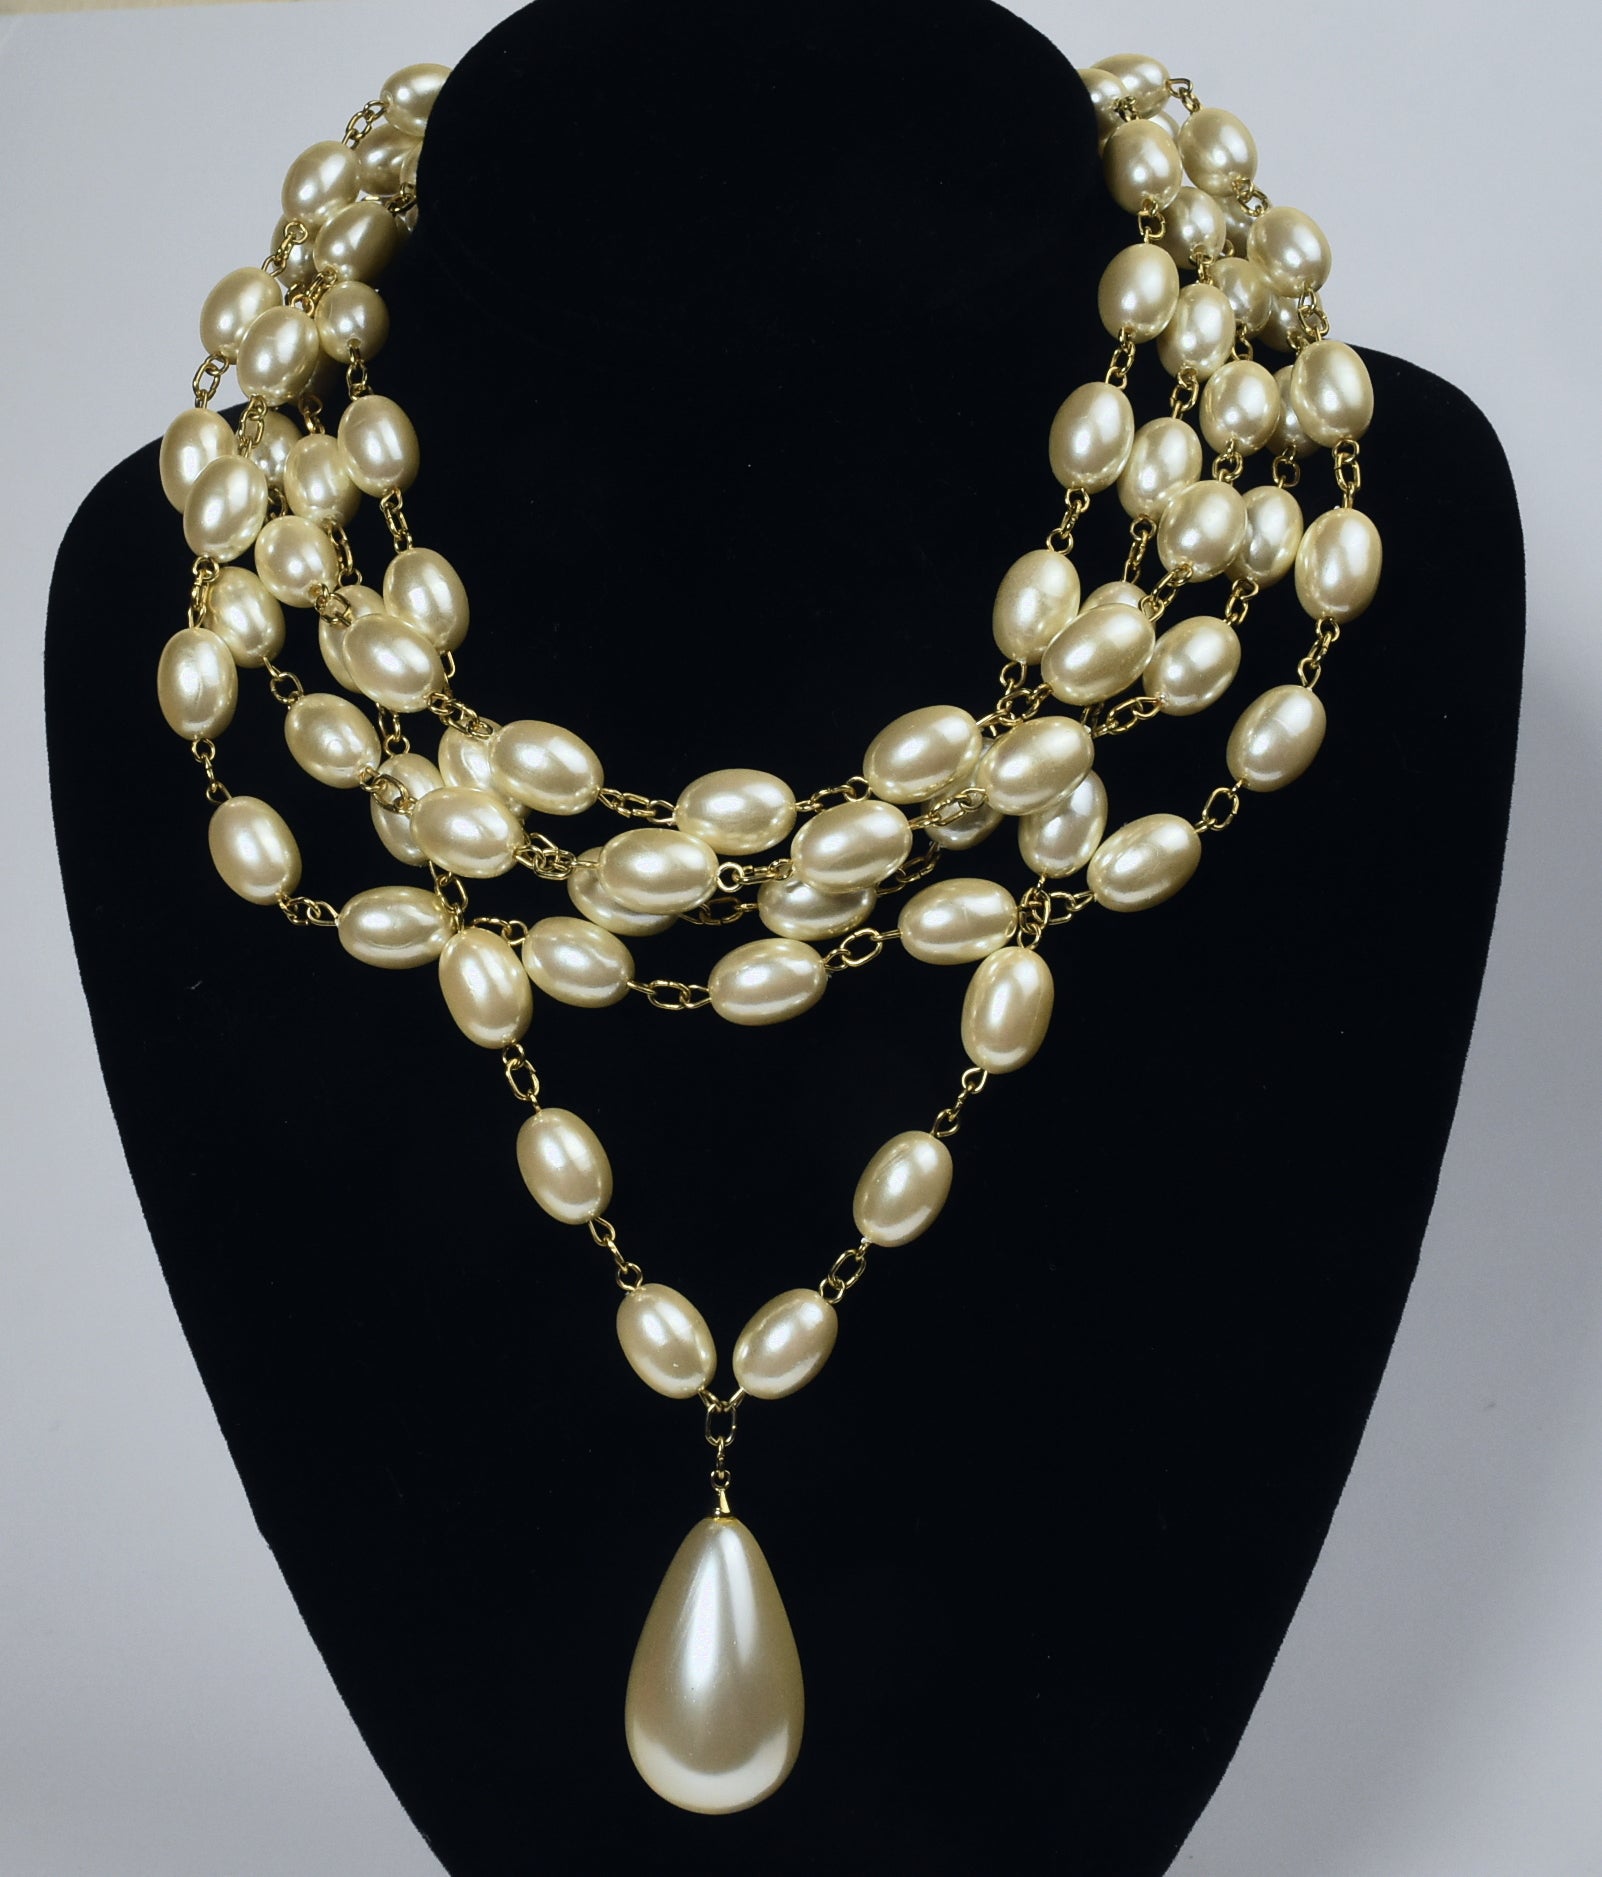 Gold Tone Four Strand Faux Pearl Necklace